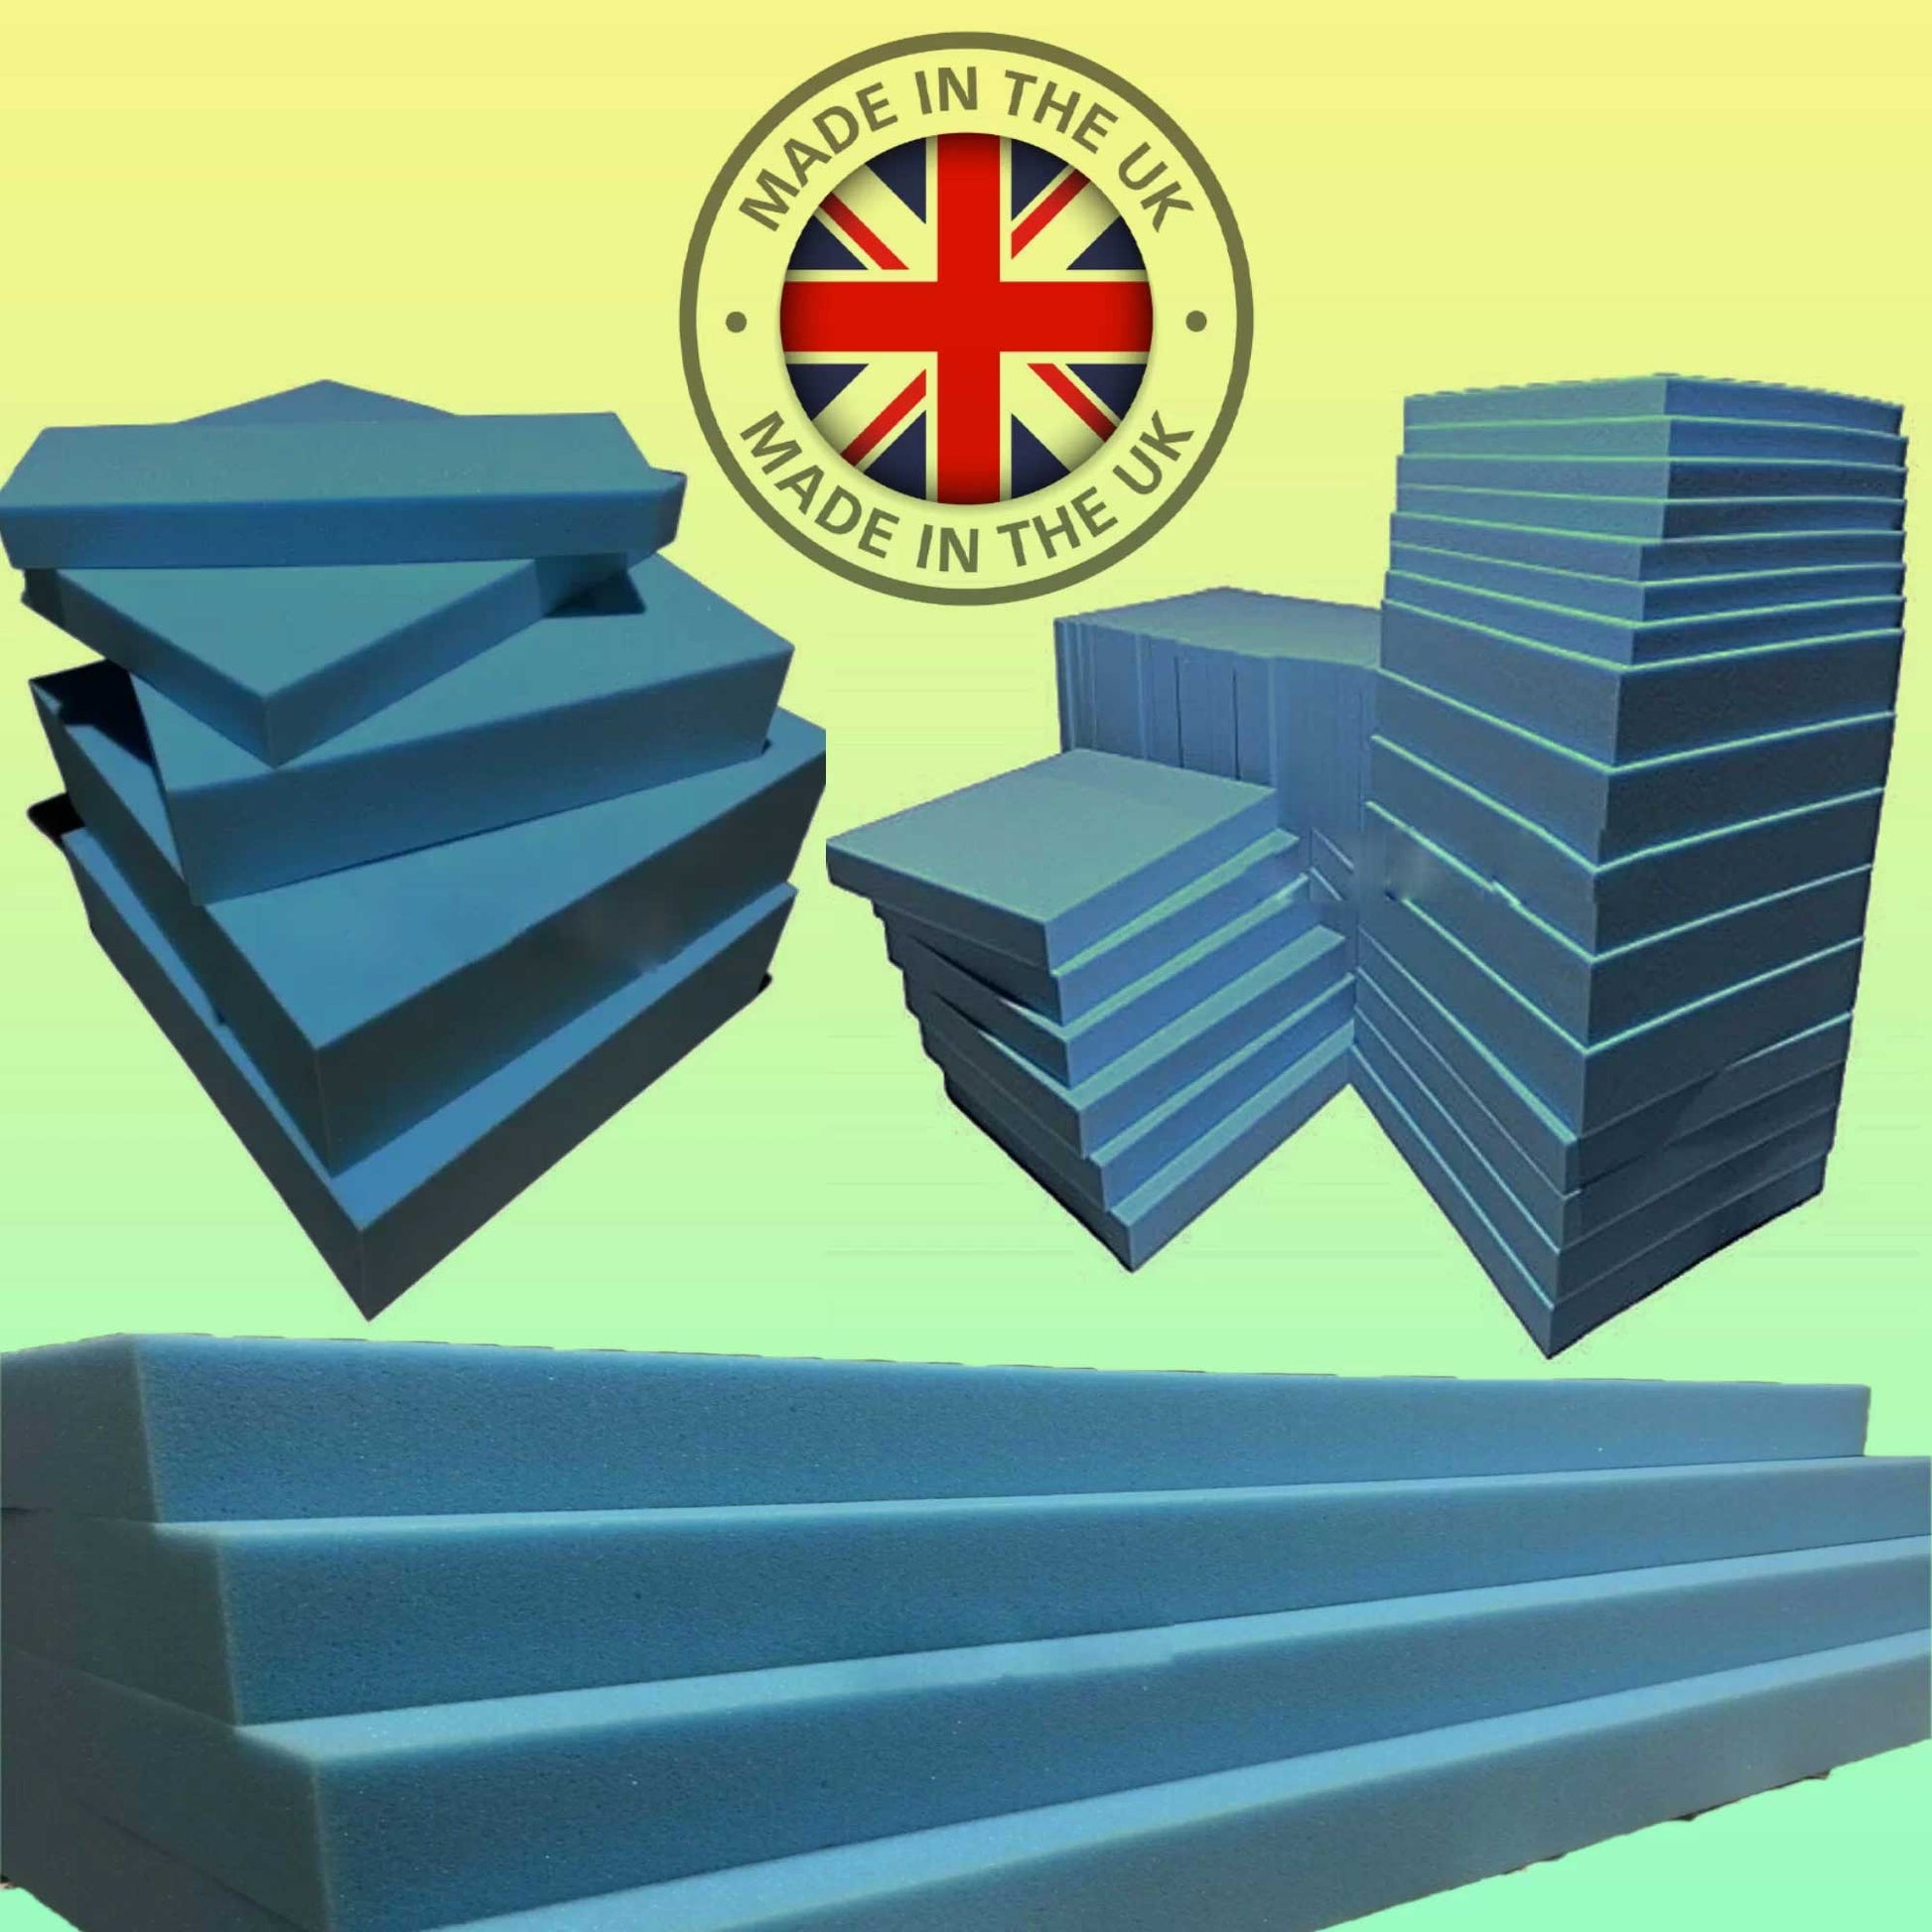 BLUE Firm Foam Cut To Any size High Density UPHOLSTERY Foam - TheComfortshop.co.ukFurniture0721718958024thecomfortshopTheComfortshop.co.ukBLUE CUT FOAM 30 X 30 X 1 INCH1 INCH30 X 30 INCHESBLUE Firm Foam Cut To Any size High Density UPHOLSTERY Foam - TheComfortshop.co.uk